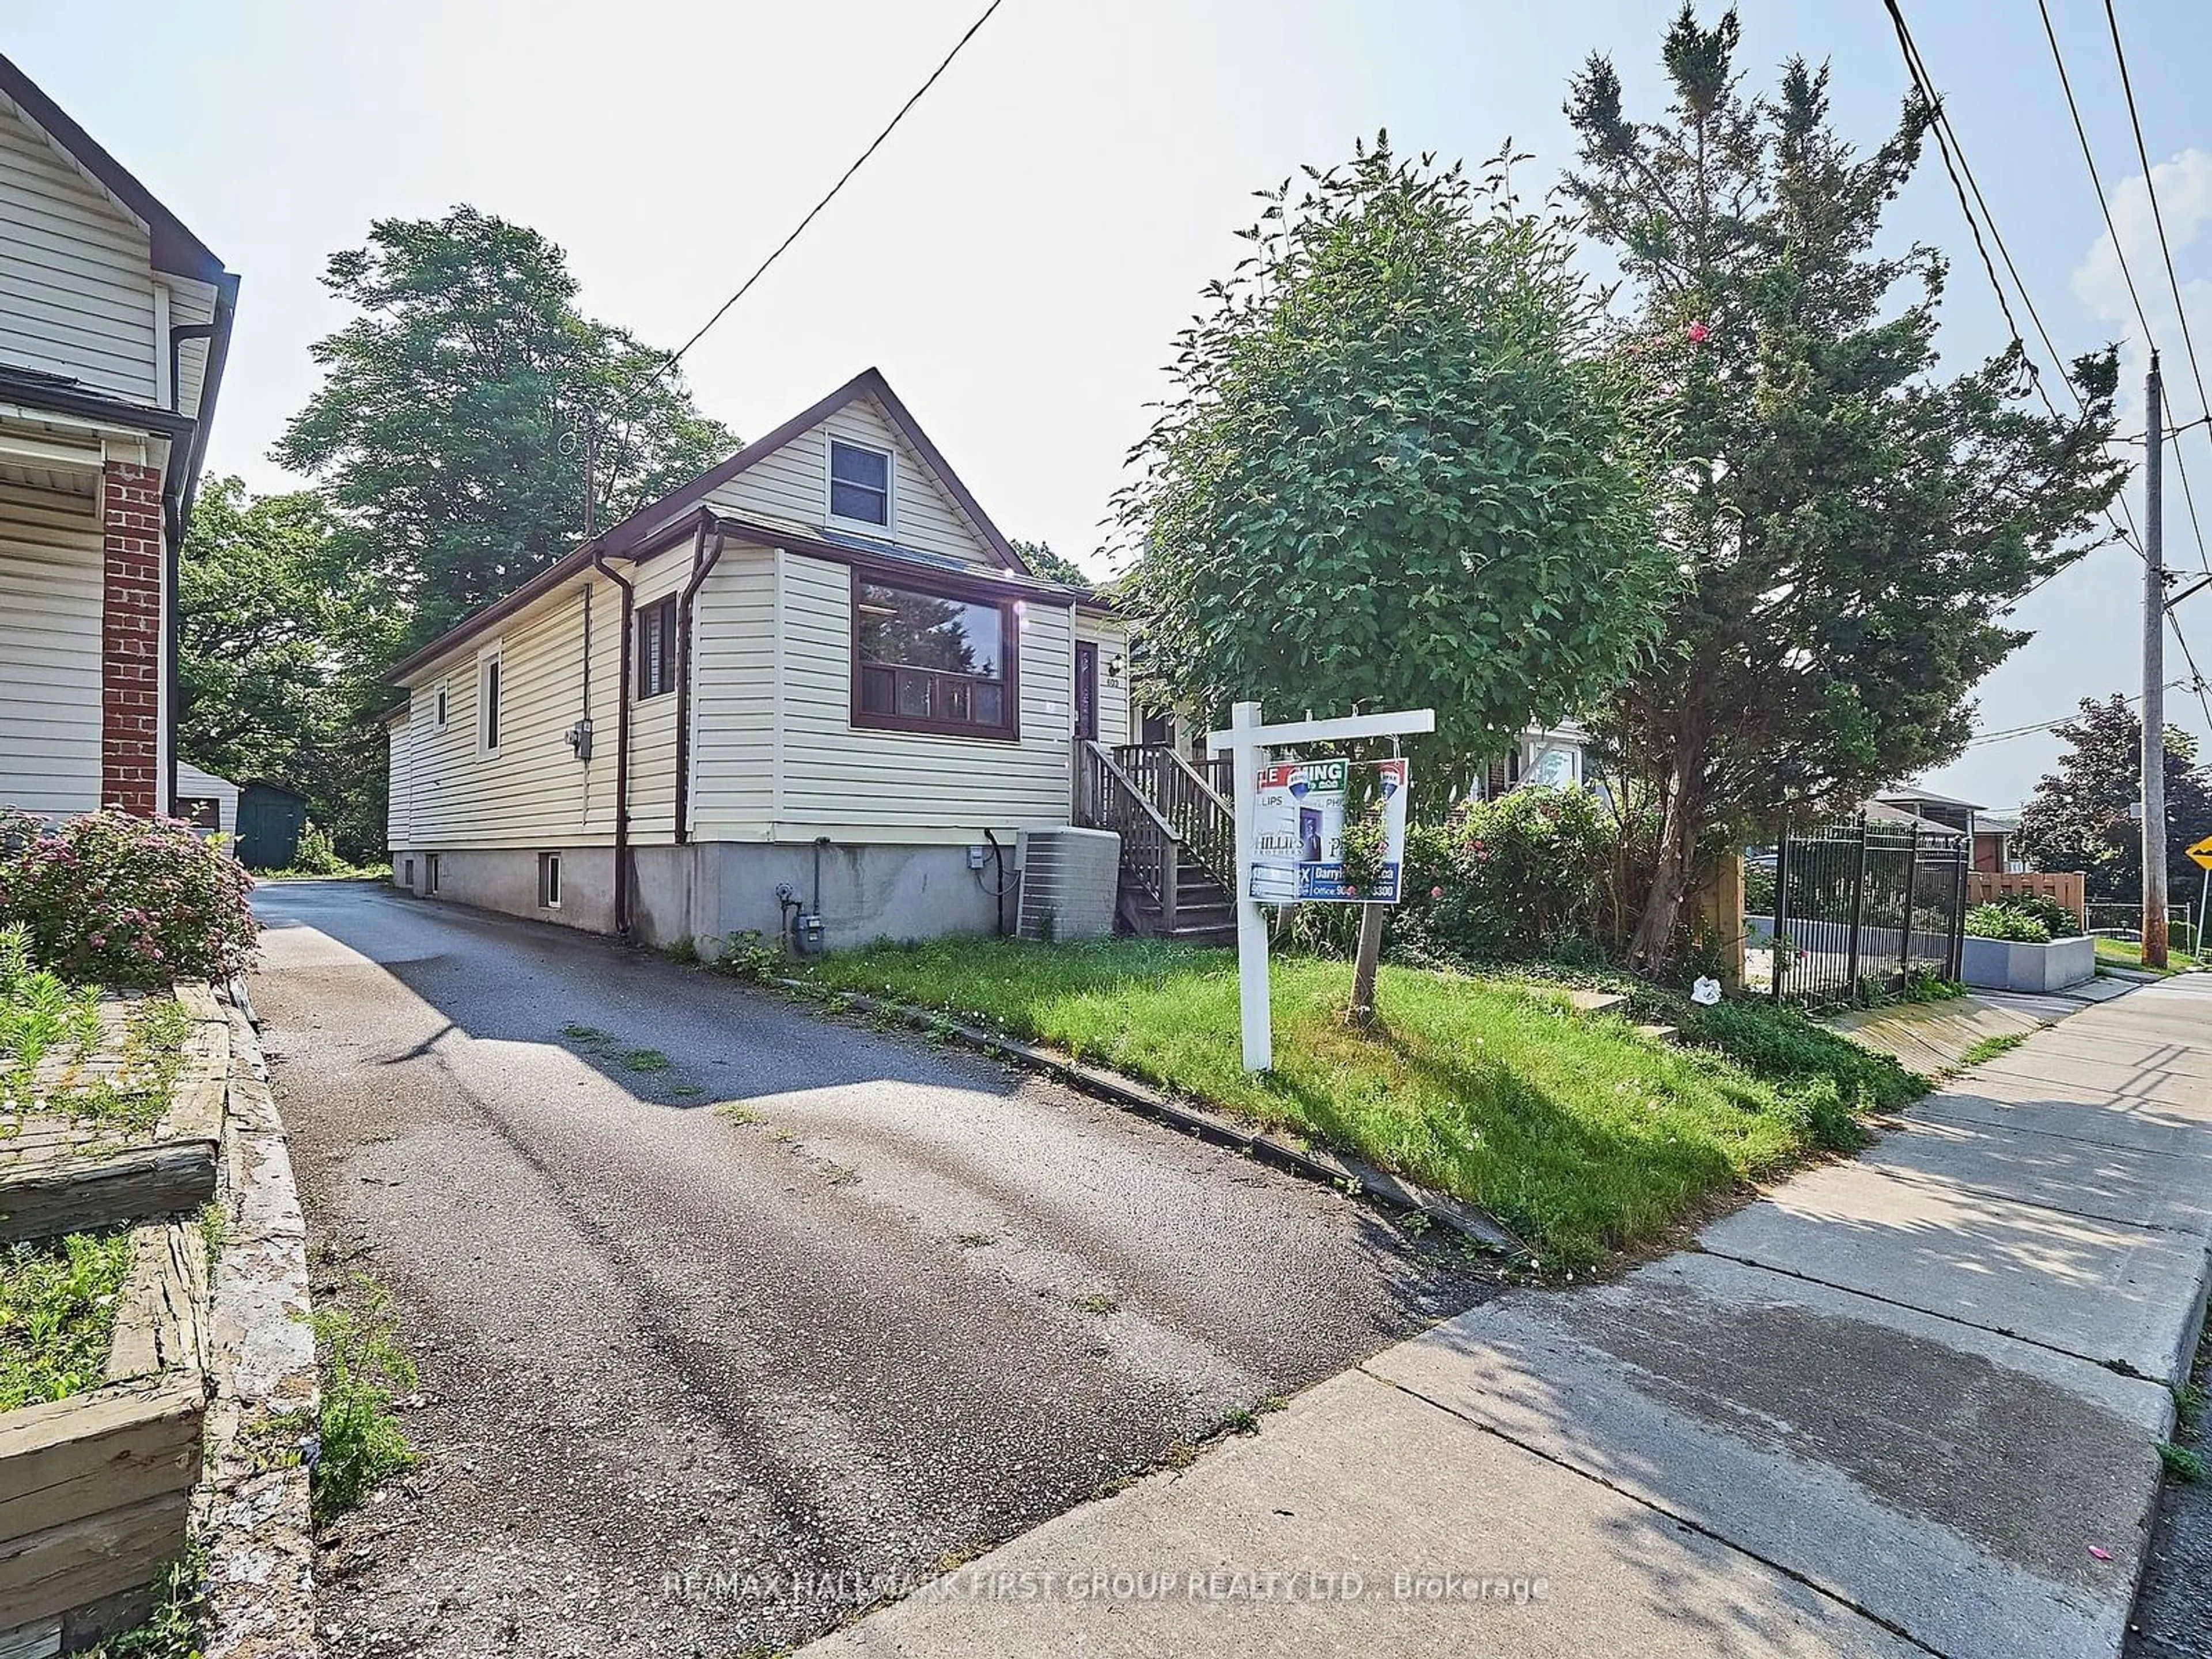 Frontside or backside of a home for 603 McRoberts Ave, Toronto Ontario M6E 4R5